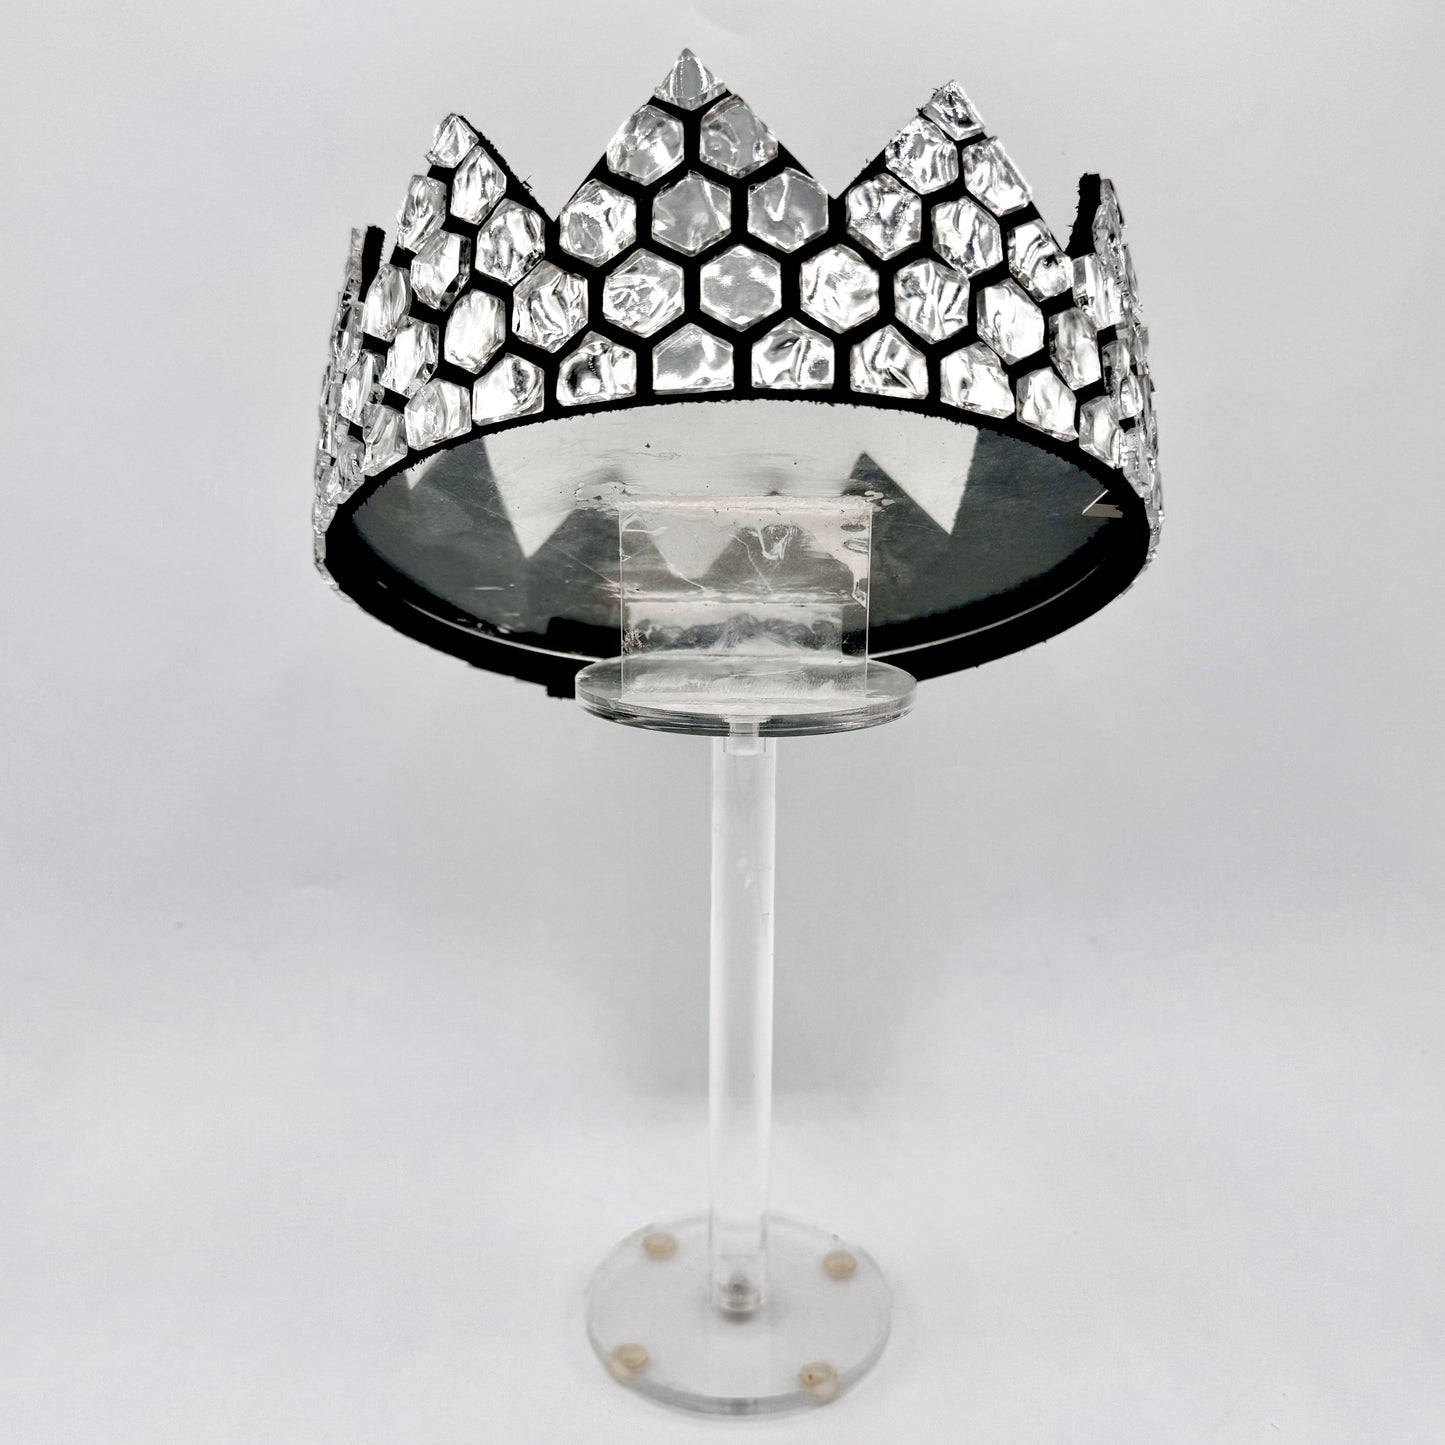 Glacial Texture Silver Honeycomb Crown on Black